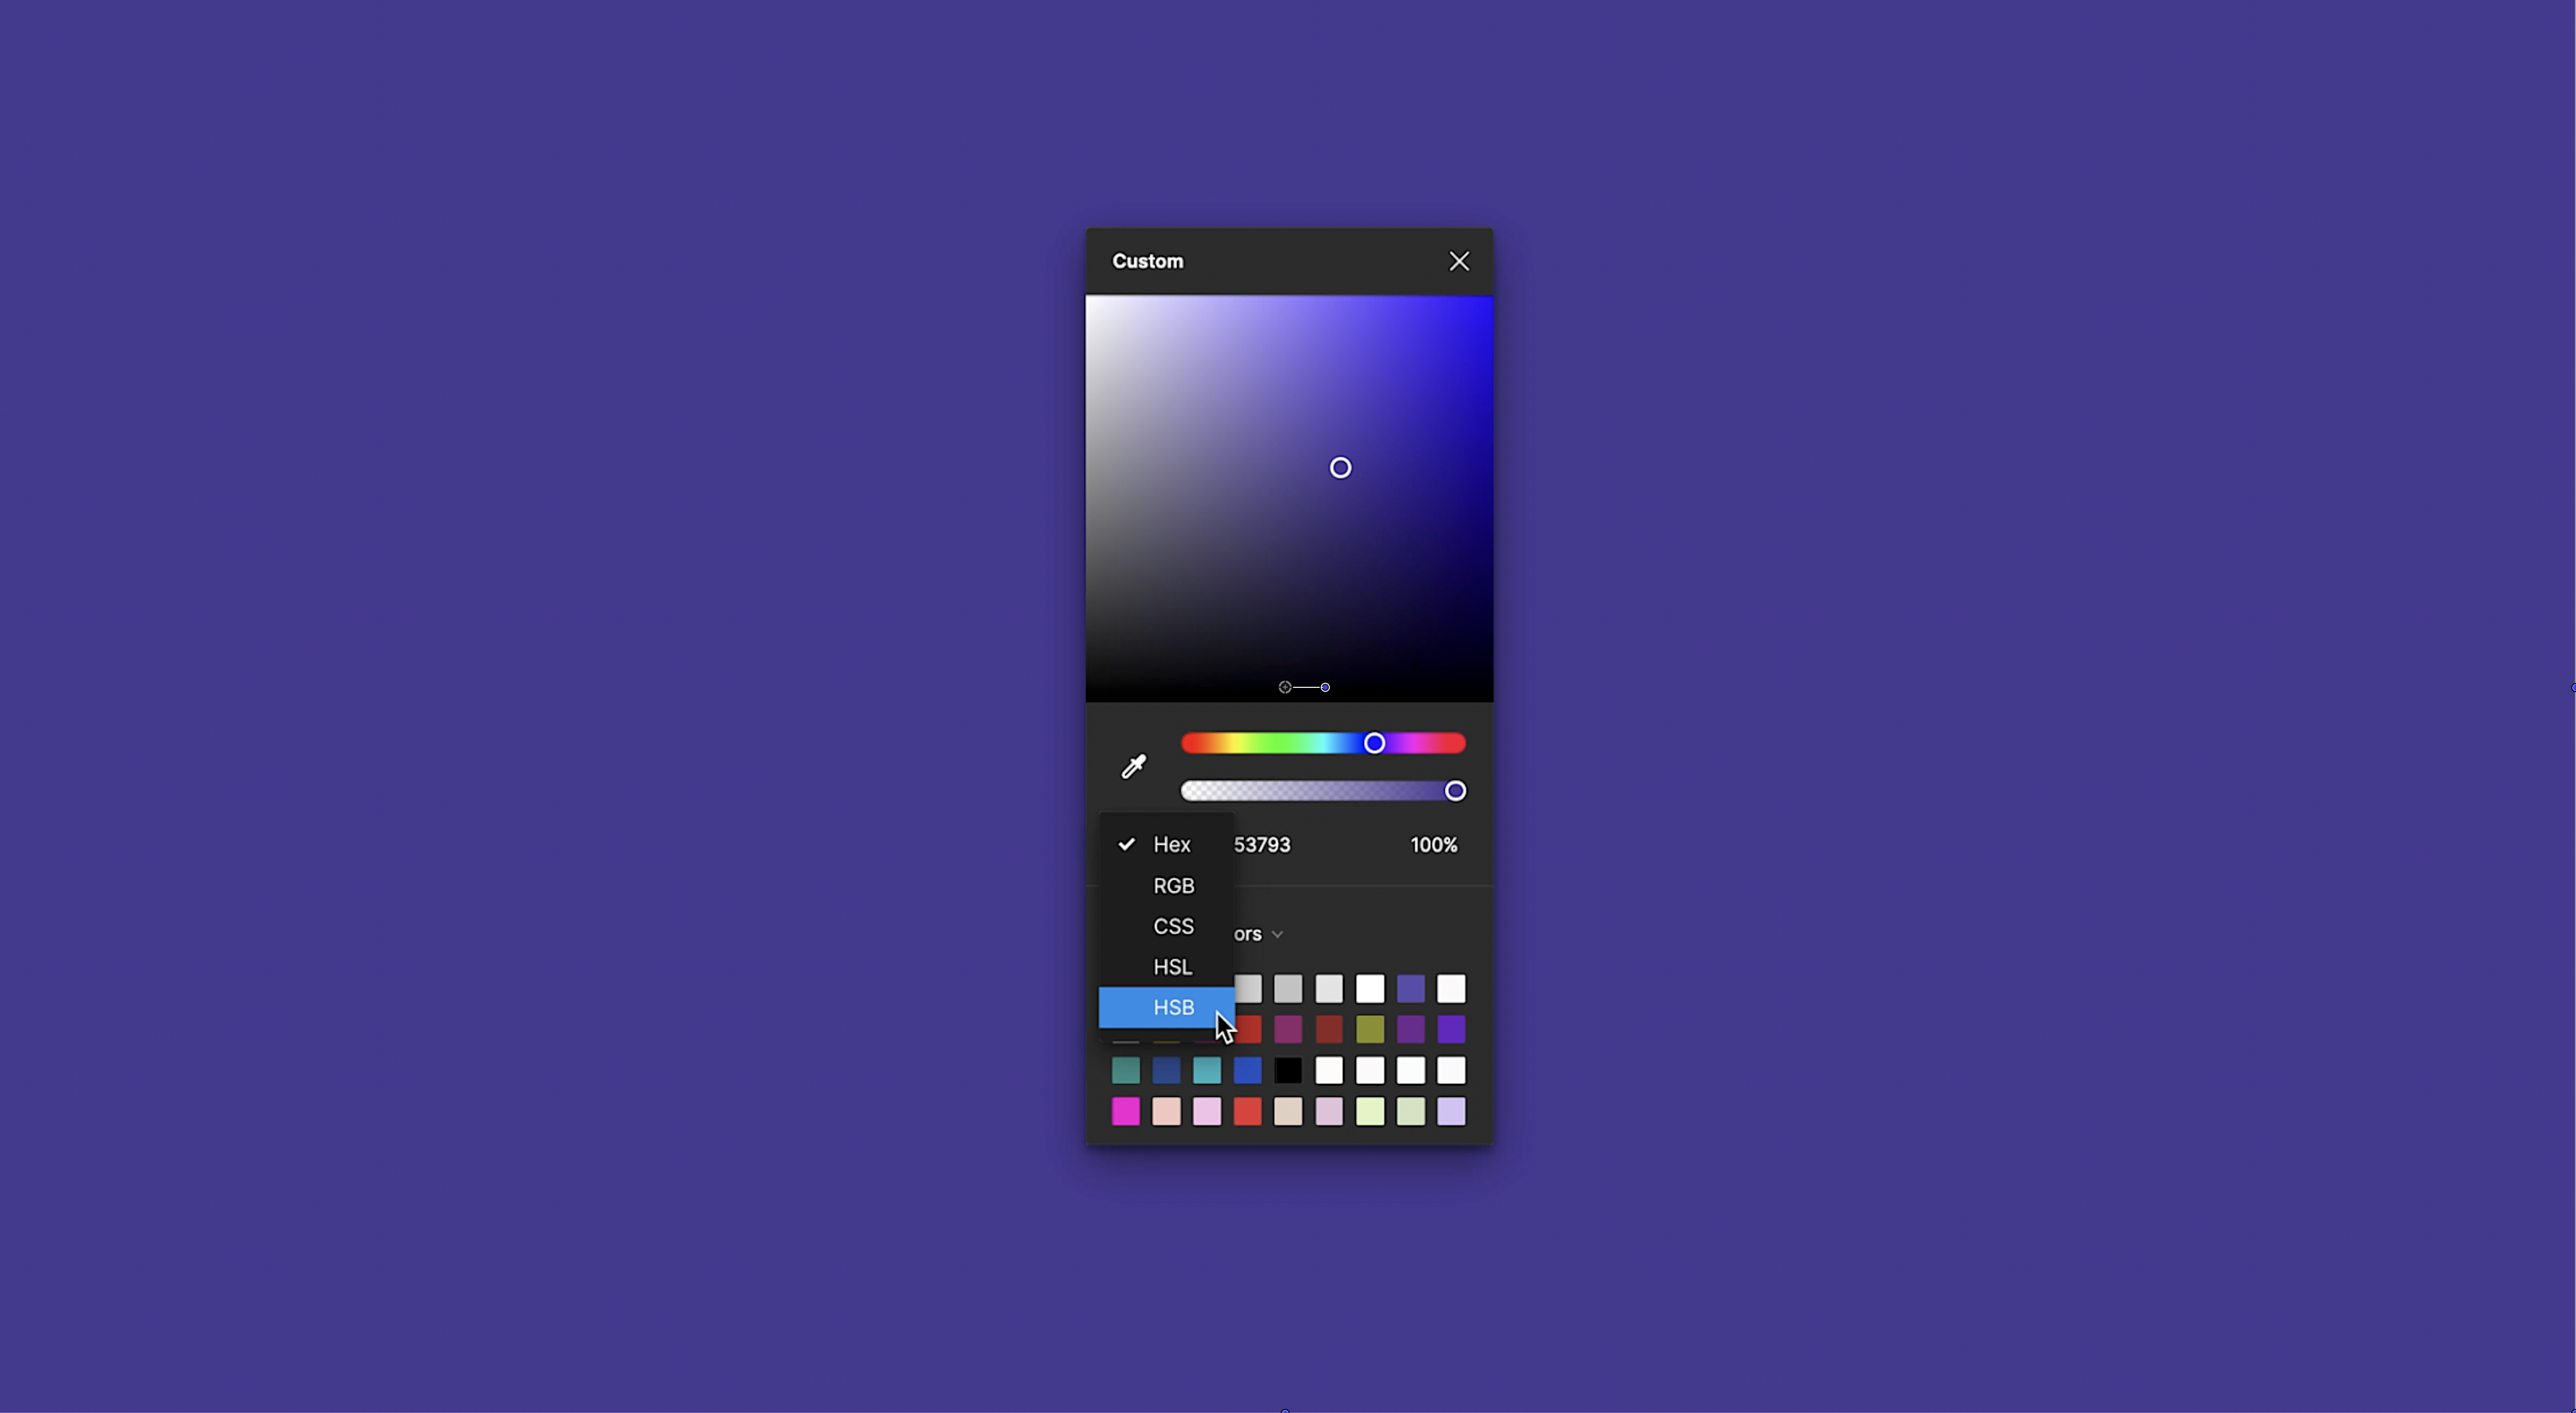 Adjust colors for control and events · Issue #1489